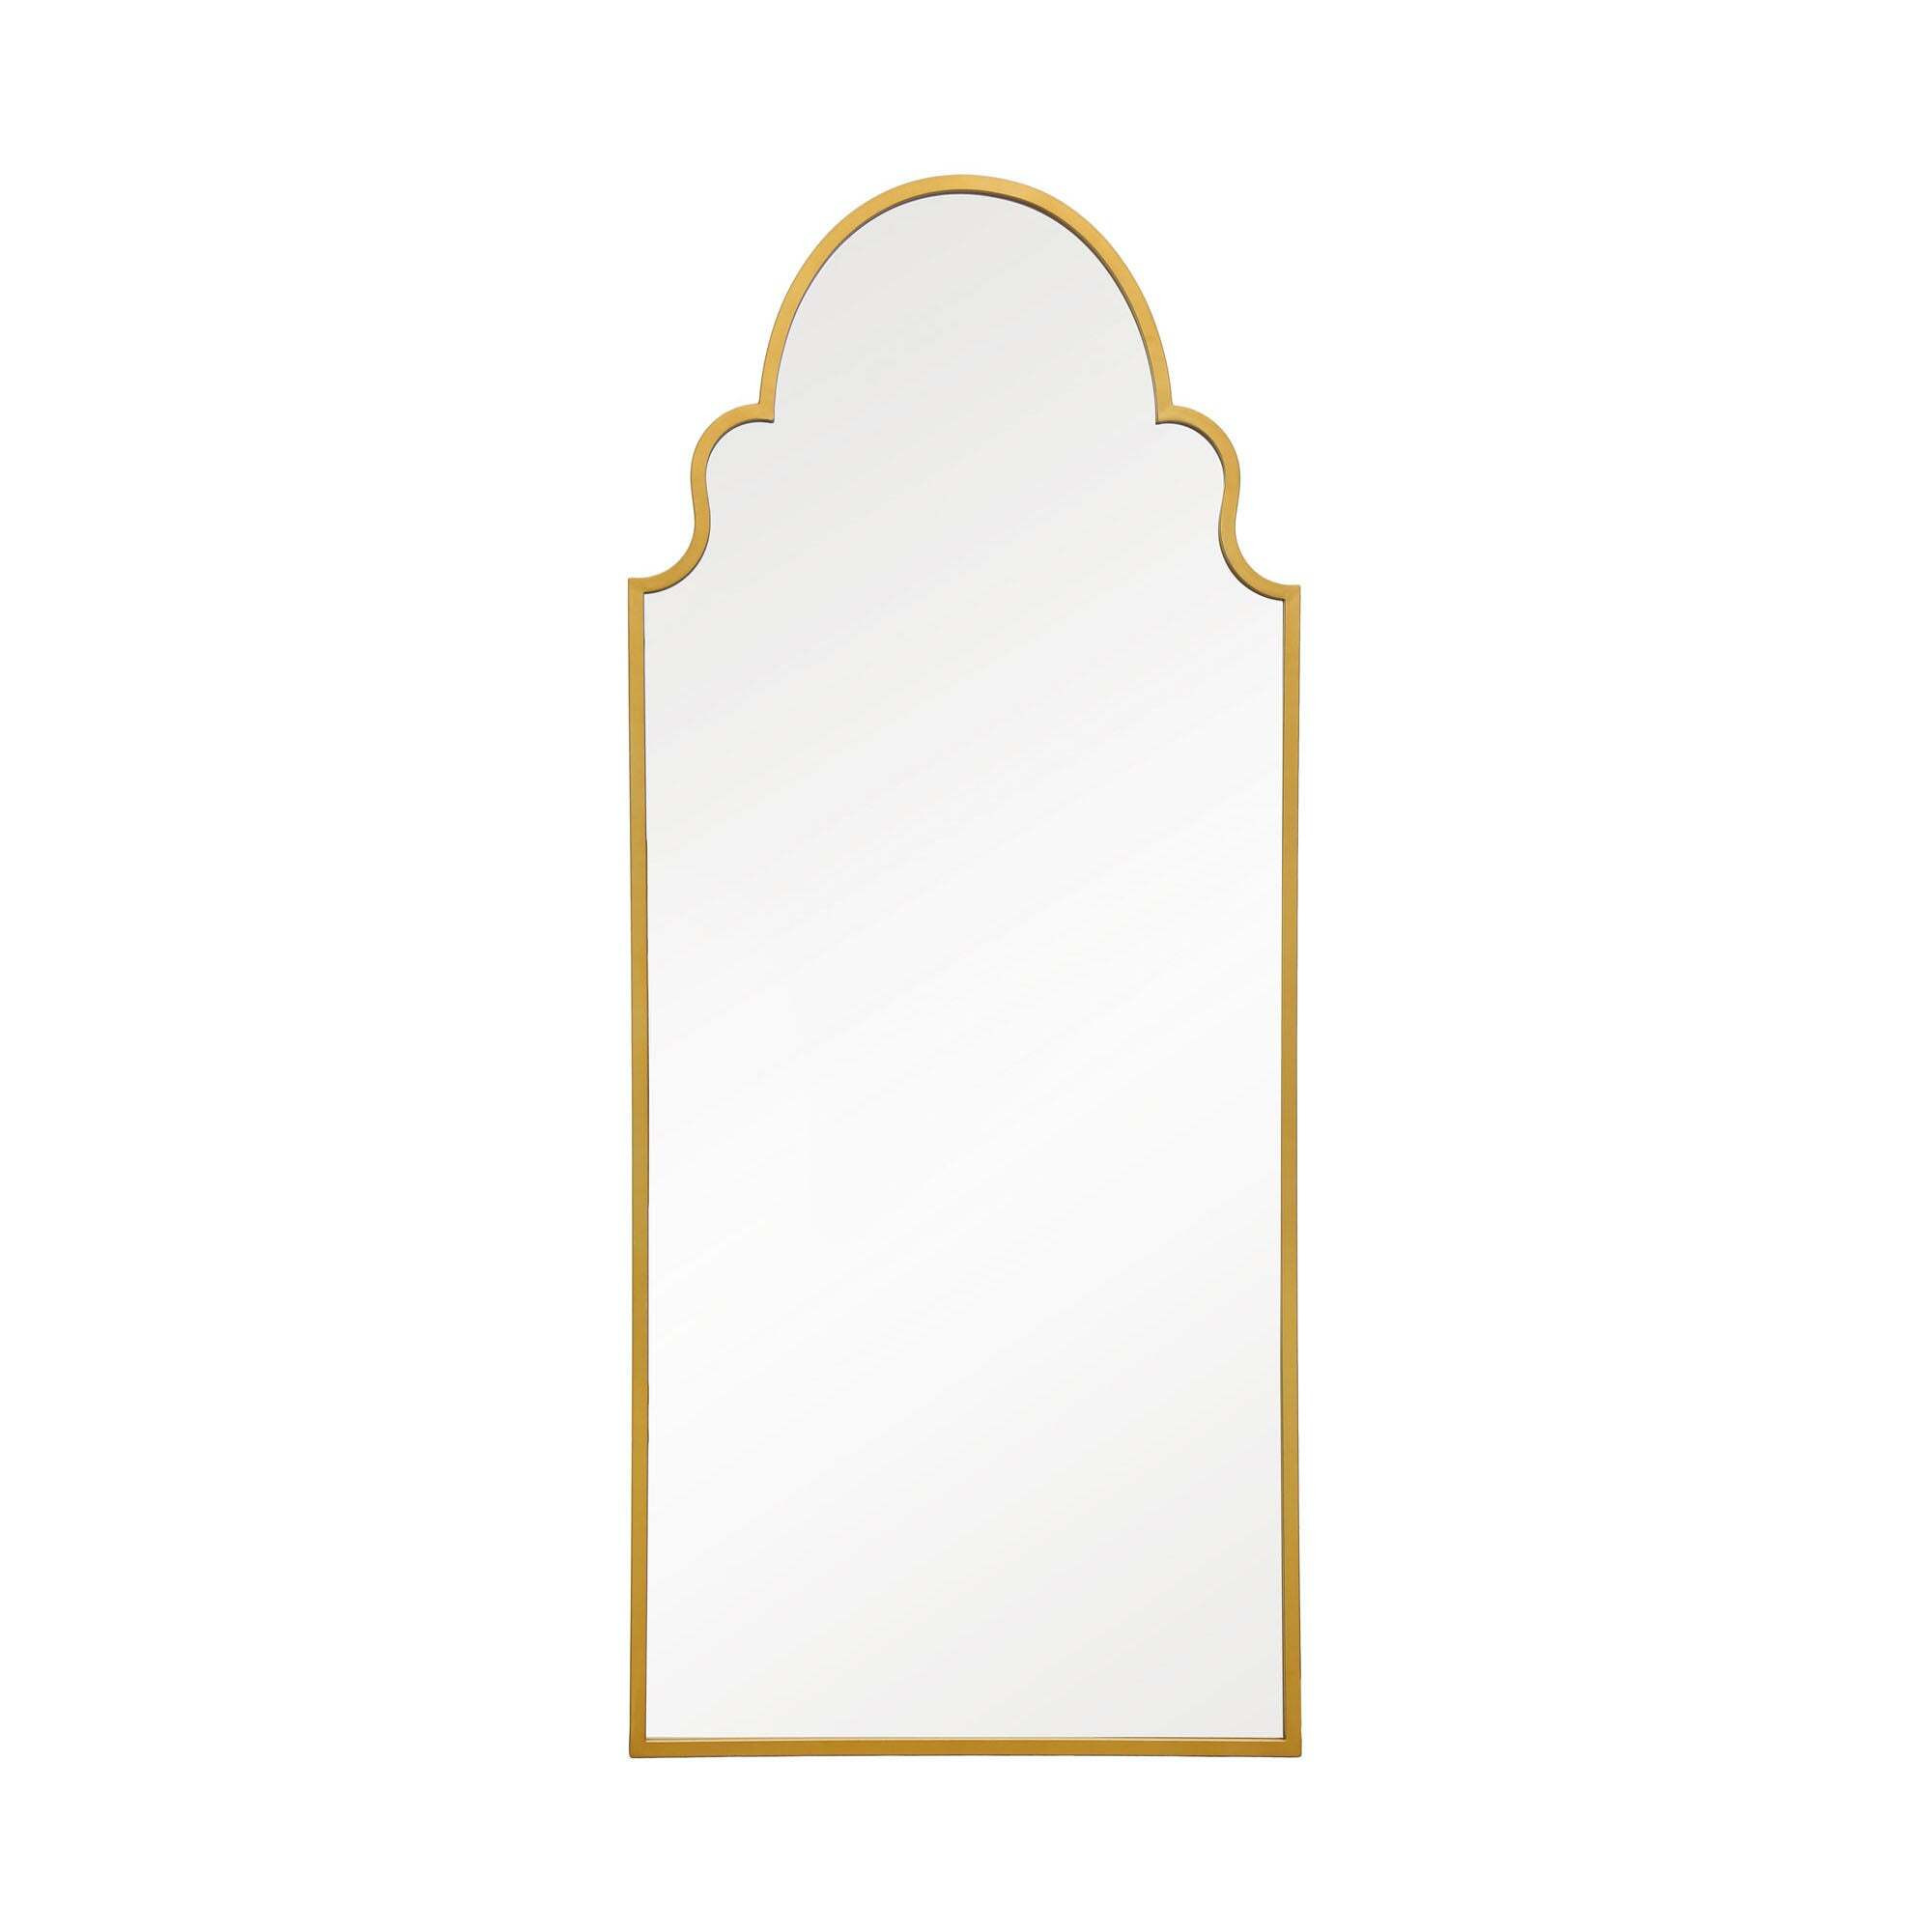 Arcus Crown Arched Full Length Wall Mirror Gold